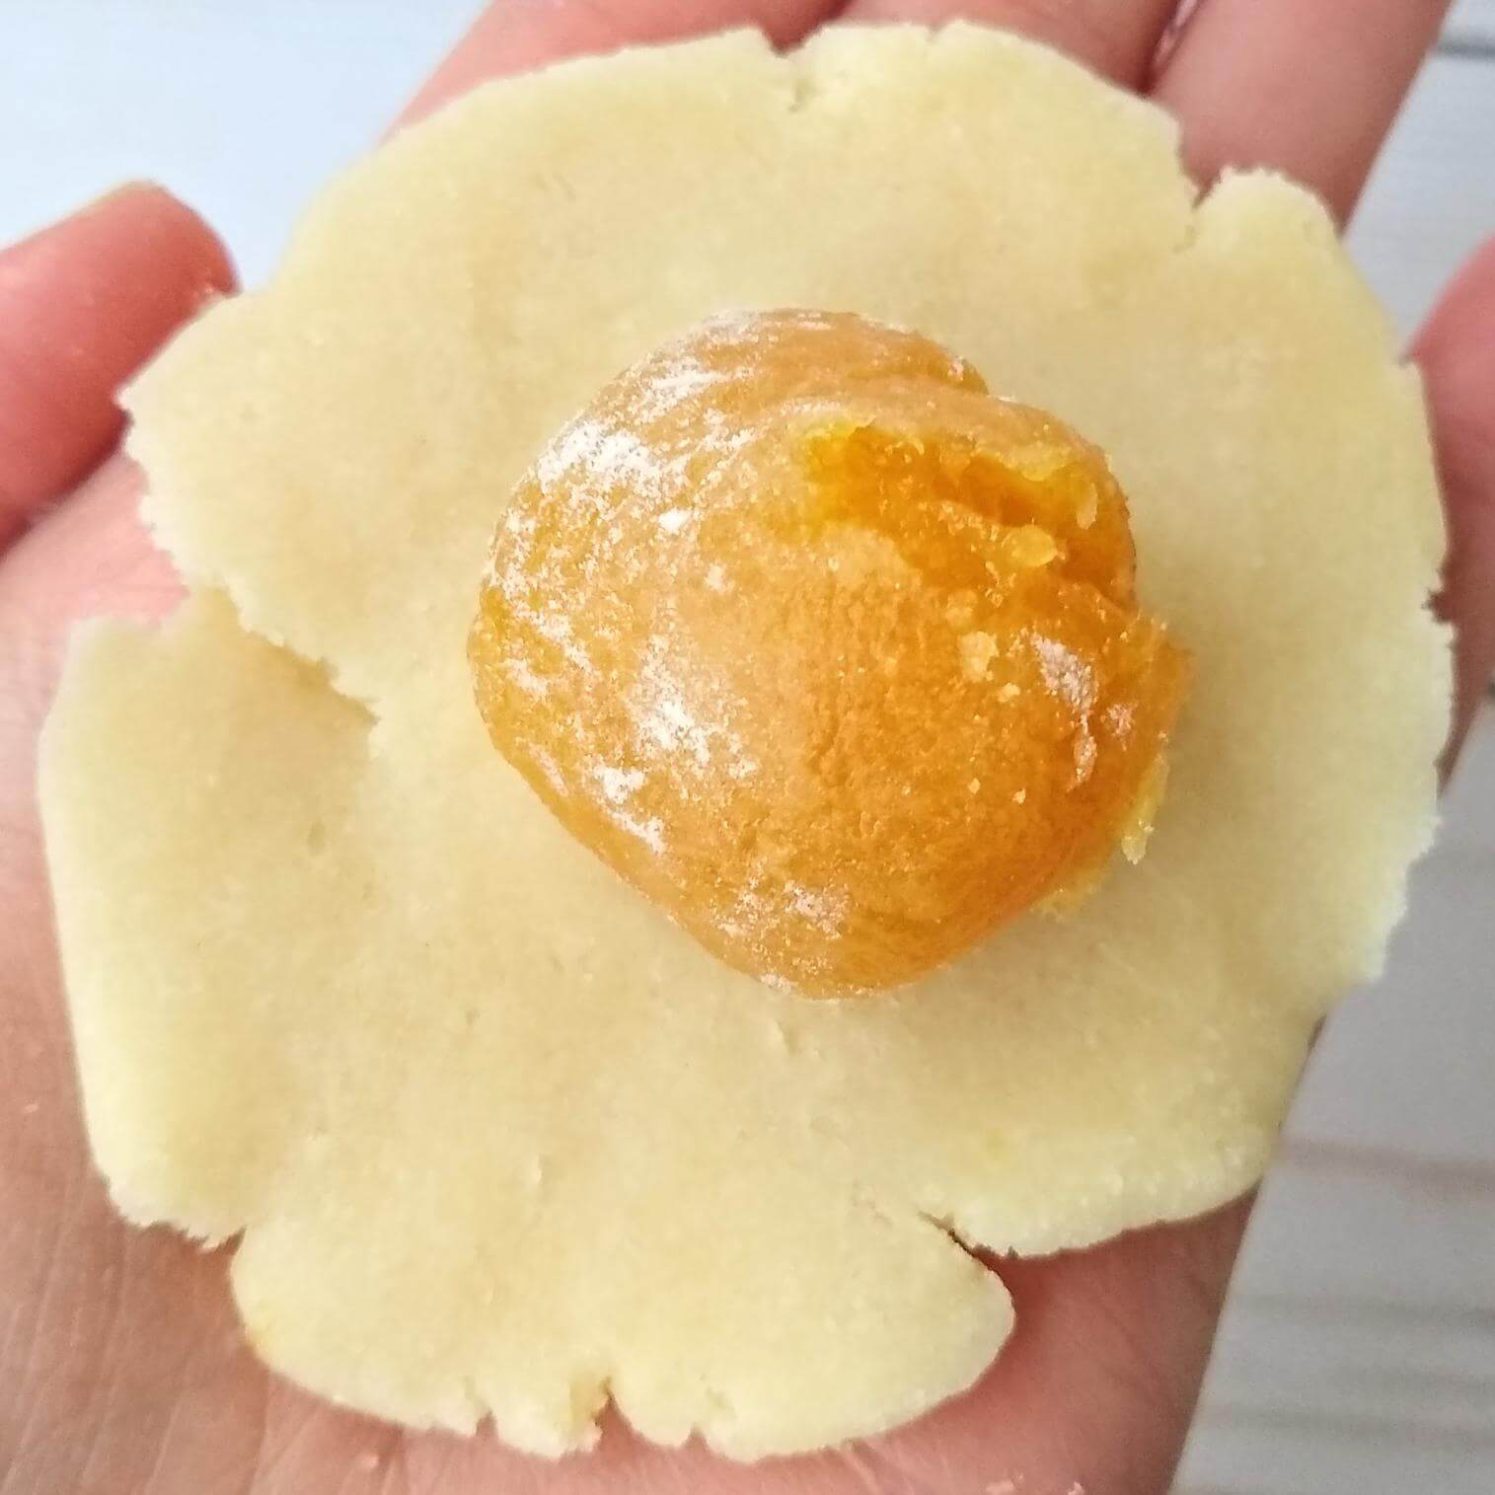 Wrapping the Taiwanese Pineapple Cakes